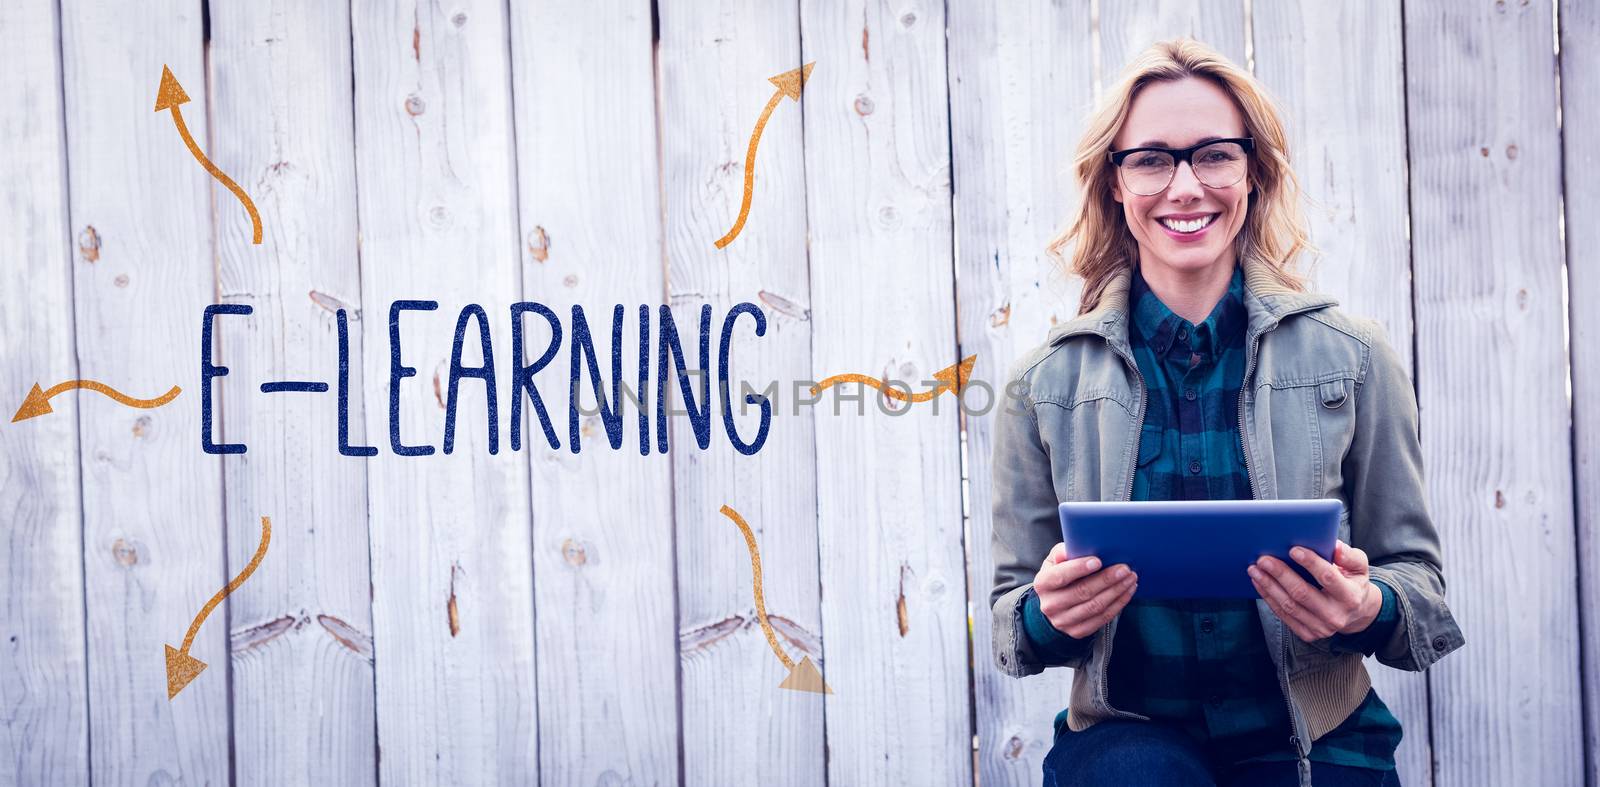 The word e-learning against smiling blonde in glasses using tablet pc